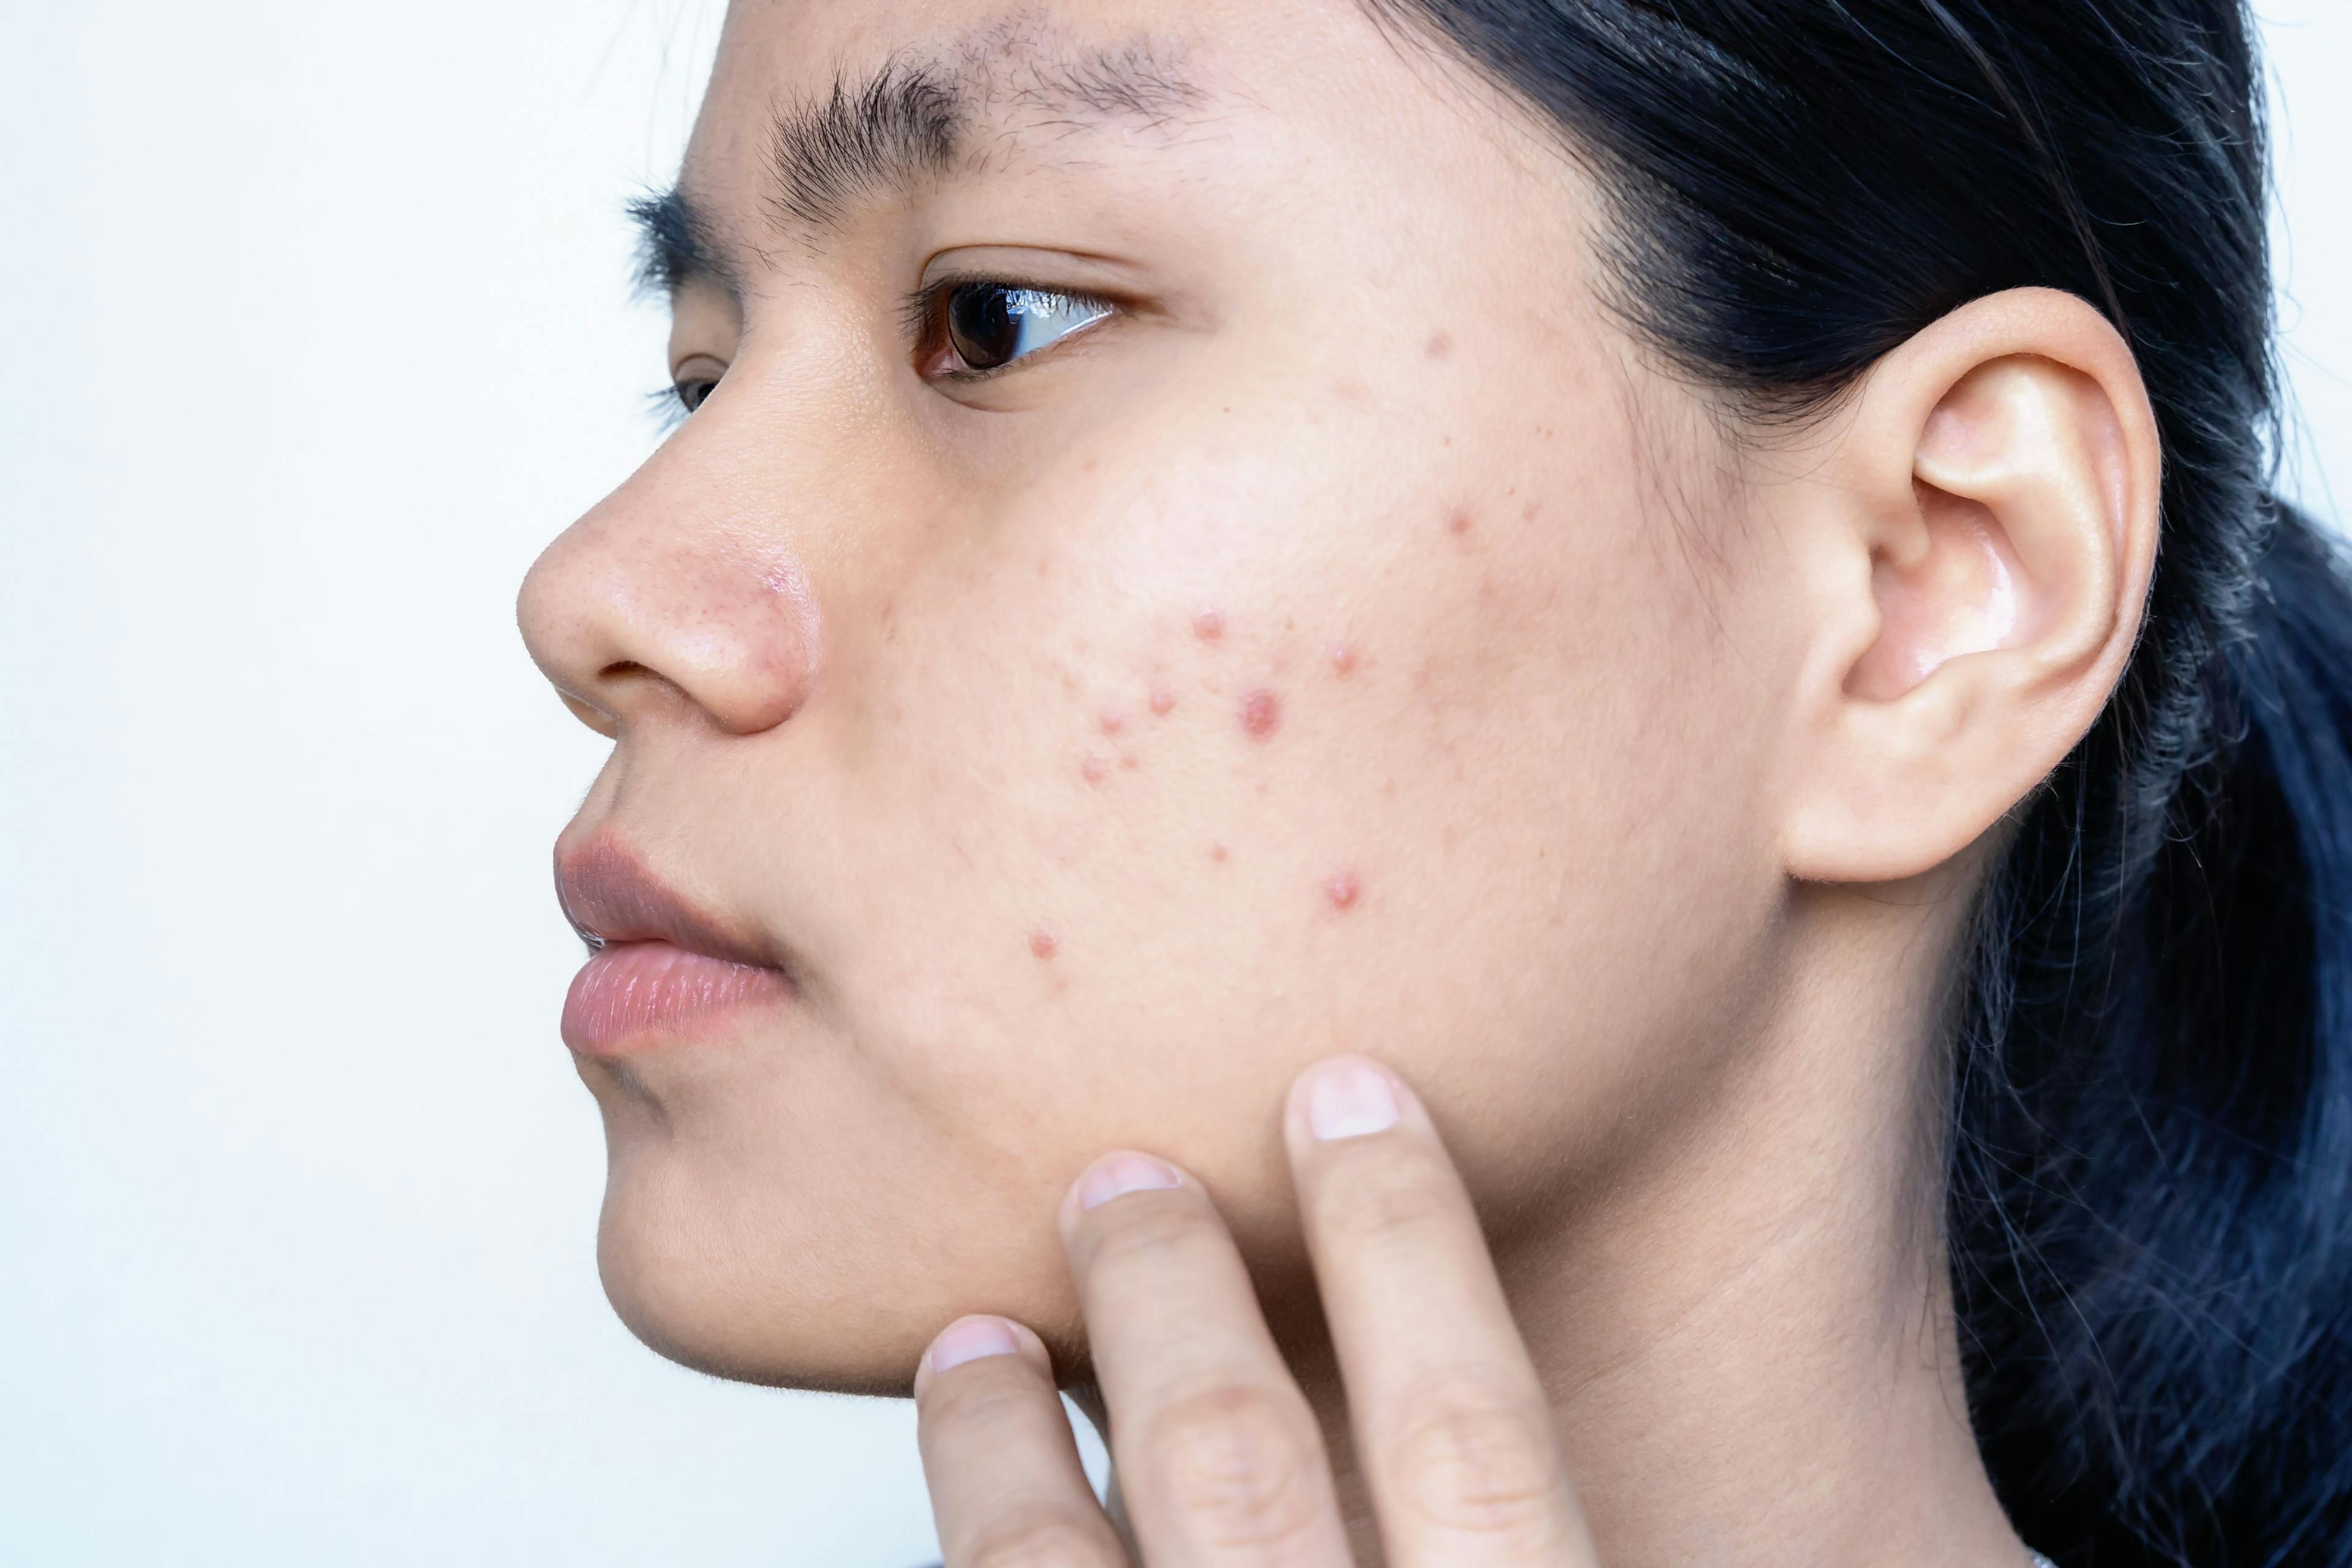 Study: Family History May Factor in Acne Presentation, Severity, and Scarring